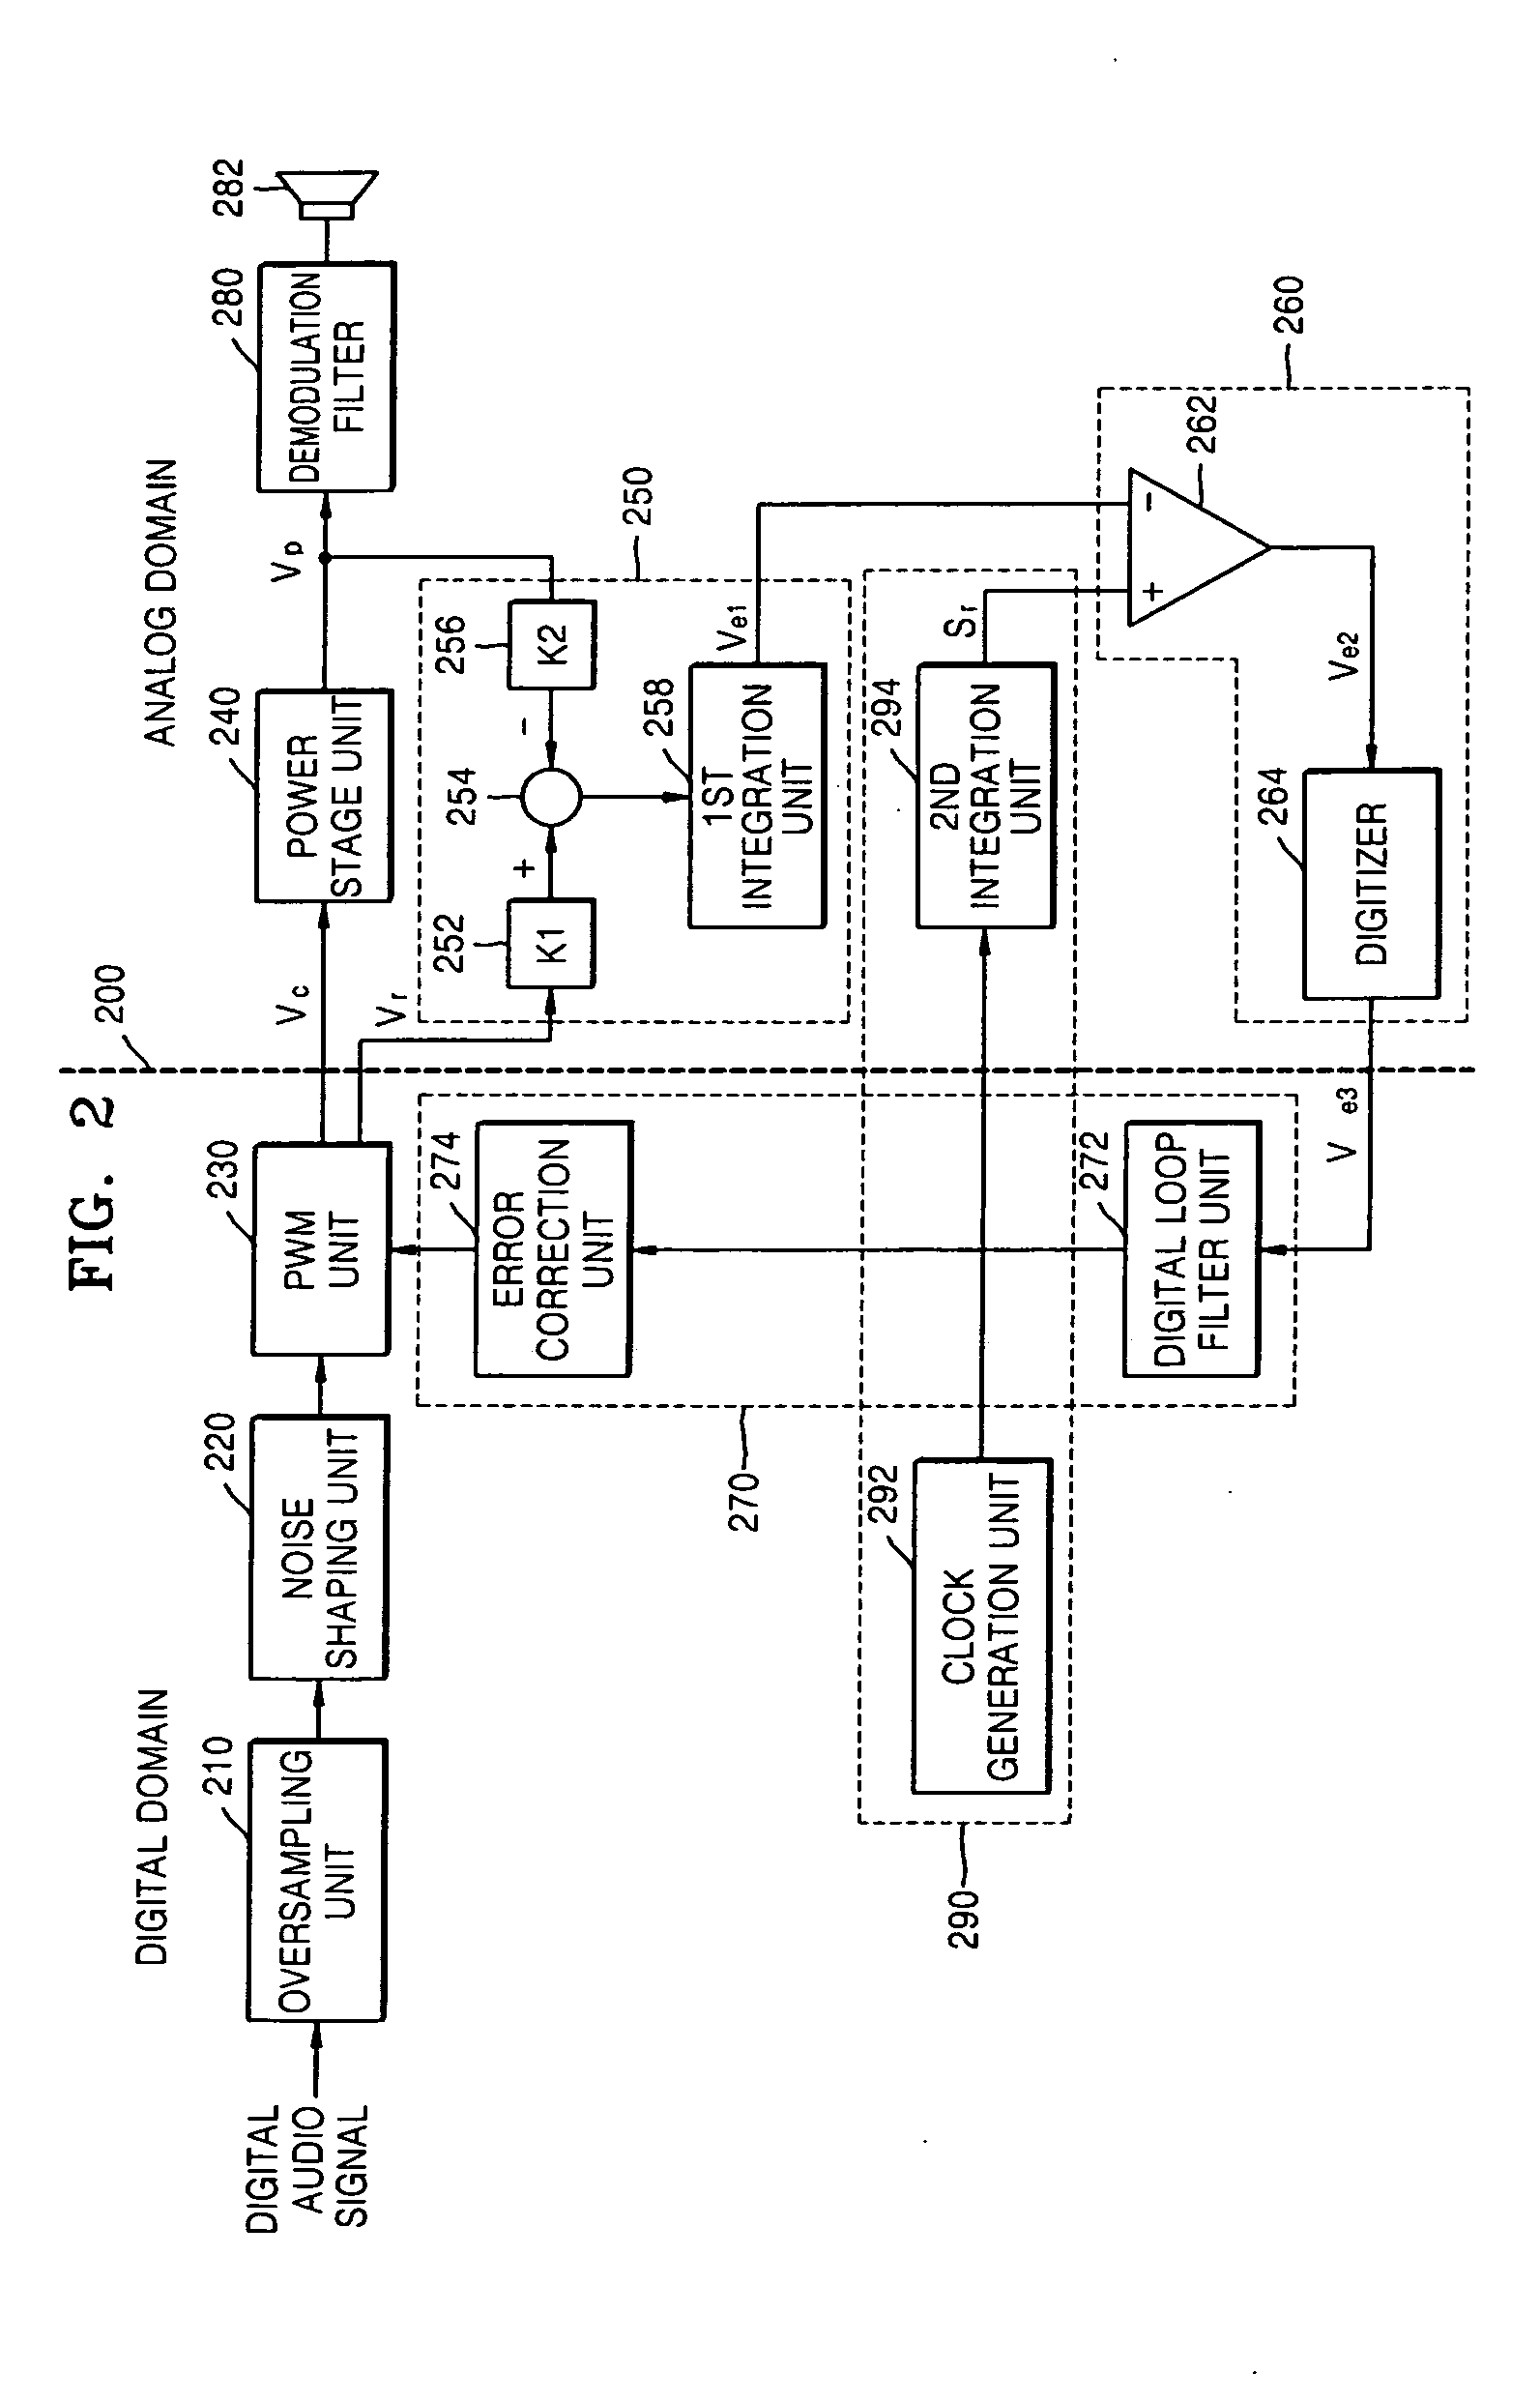 Method and apparatus to correct an error in a switching power amplifier